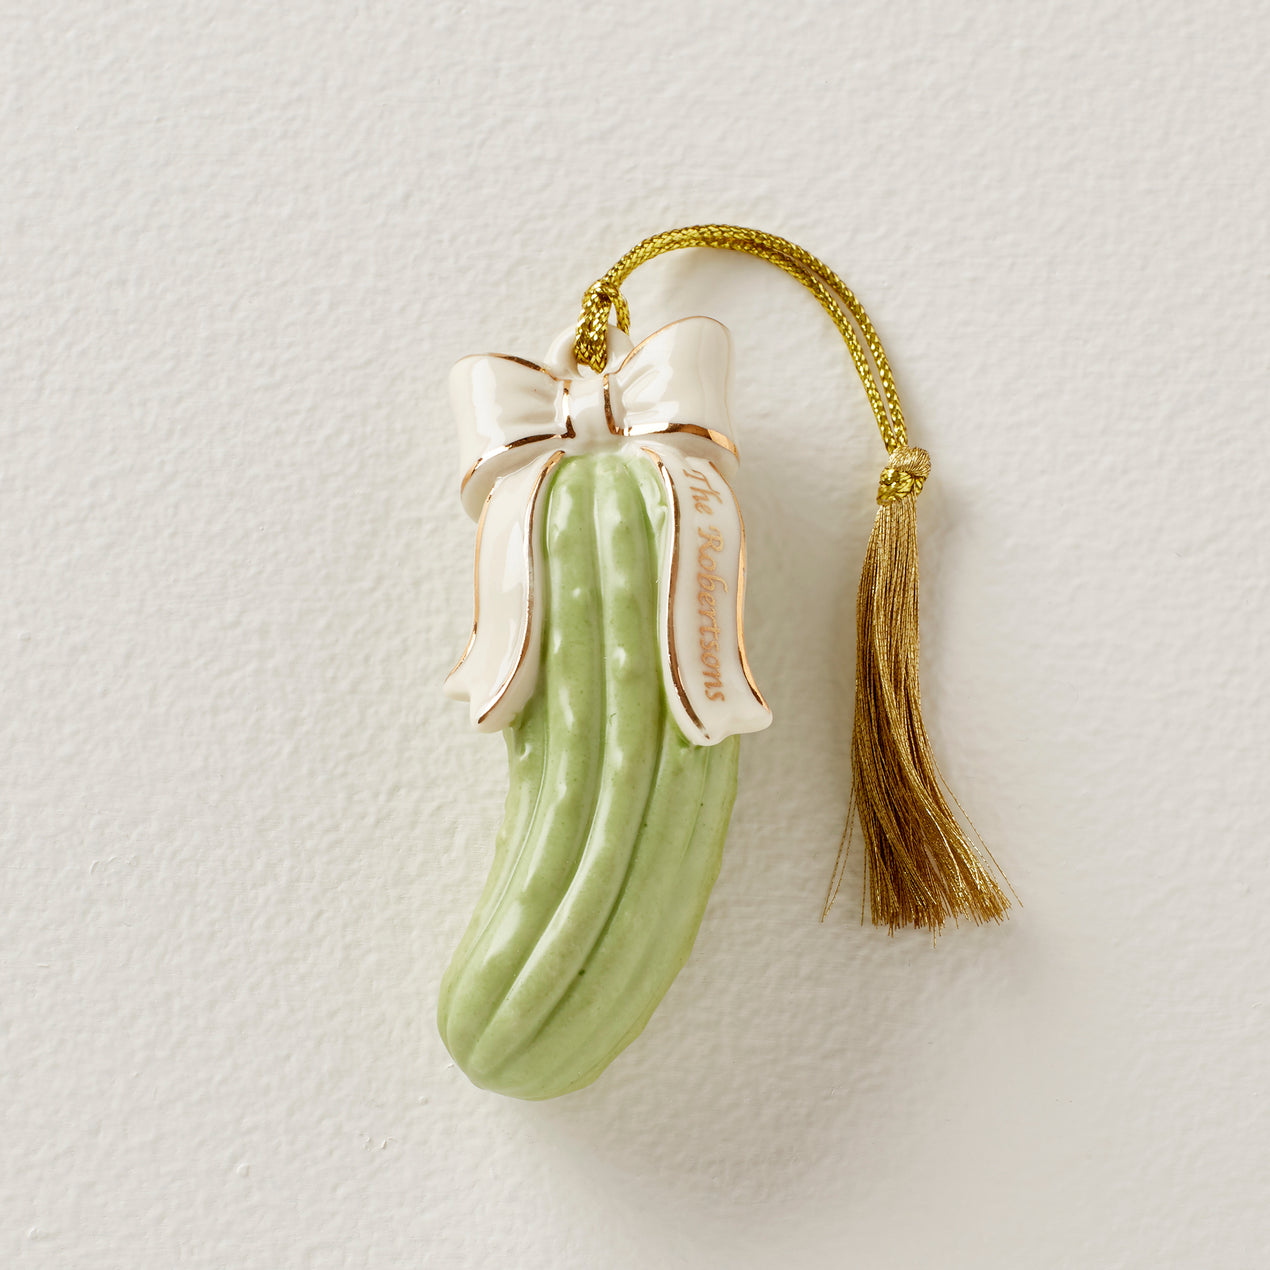 Compare prices for Funny Pickle Gifts & Funny Pickle Designs